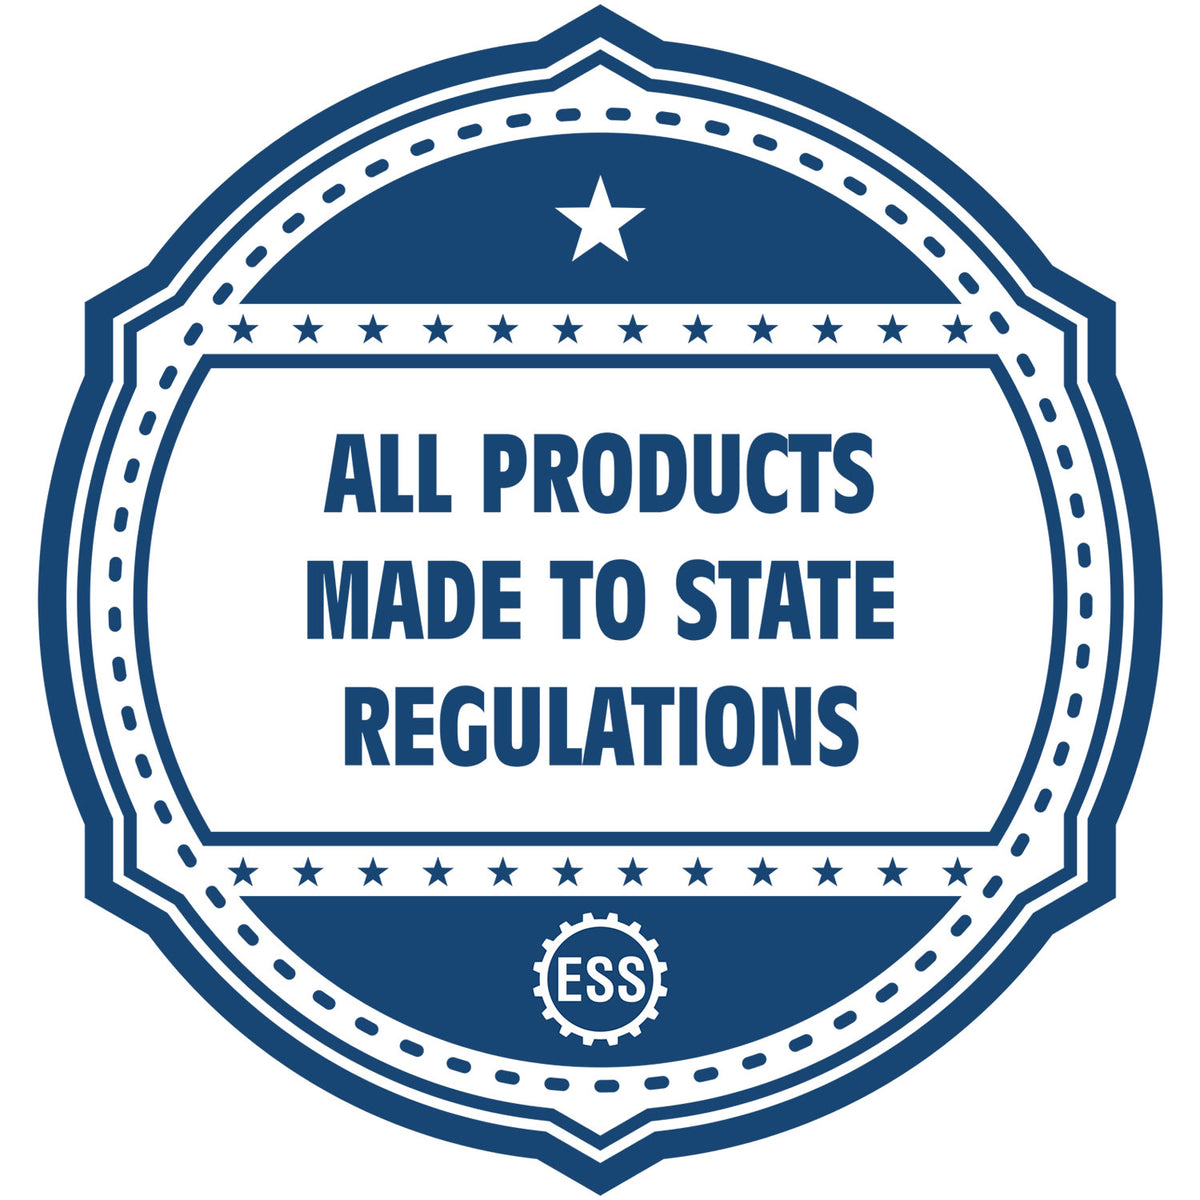 An icon or badge element for the Slim Pre-Inked State Seal Notary Stamp for West Virginia showing that this product is made in compliance with state regulations.